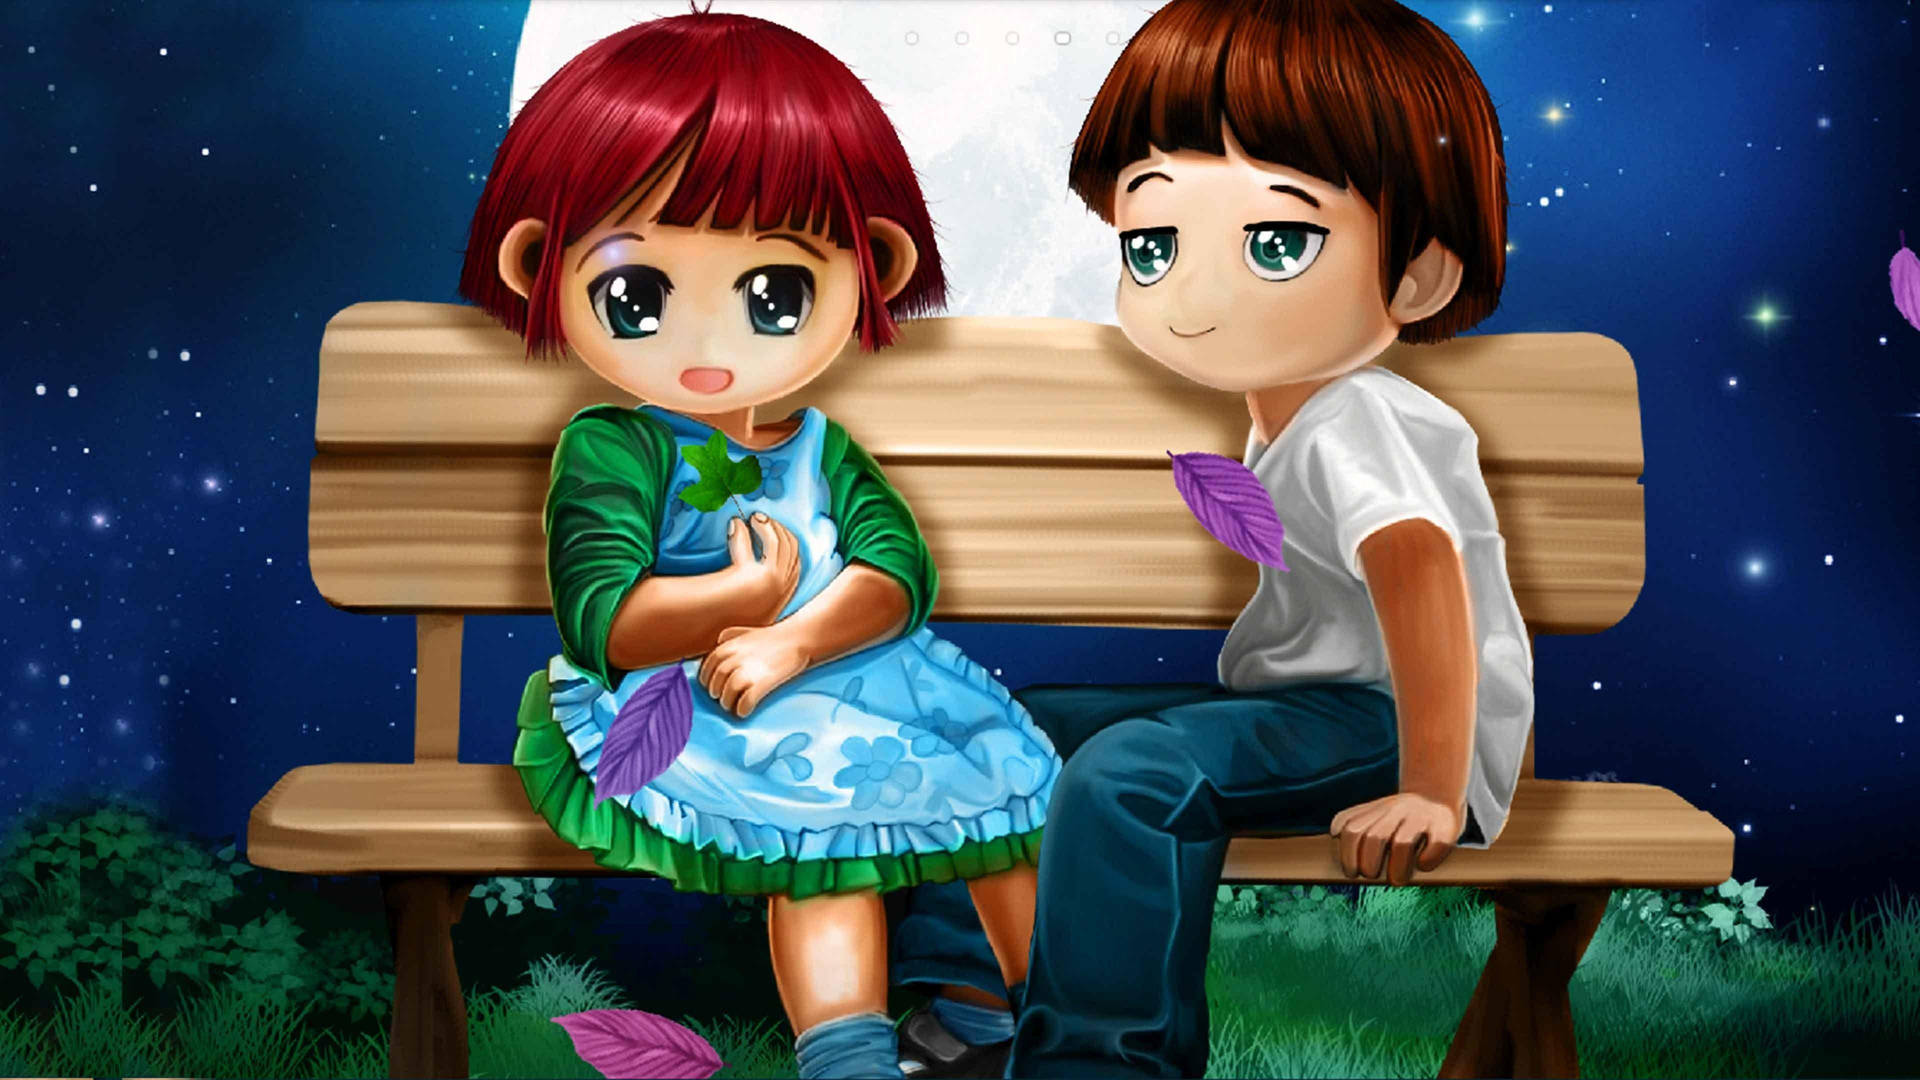 Cute Cartoon Couple On Bench Background